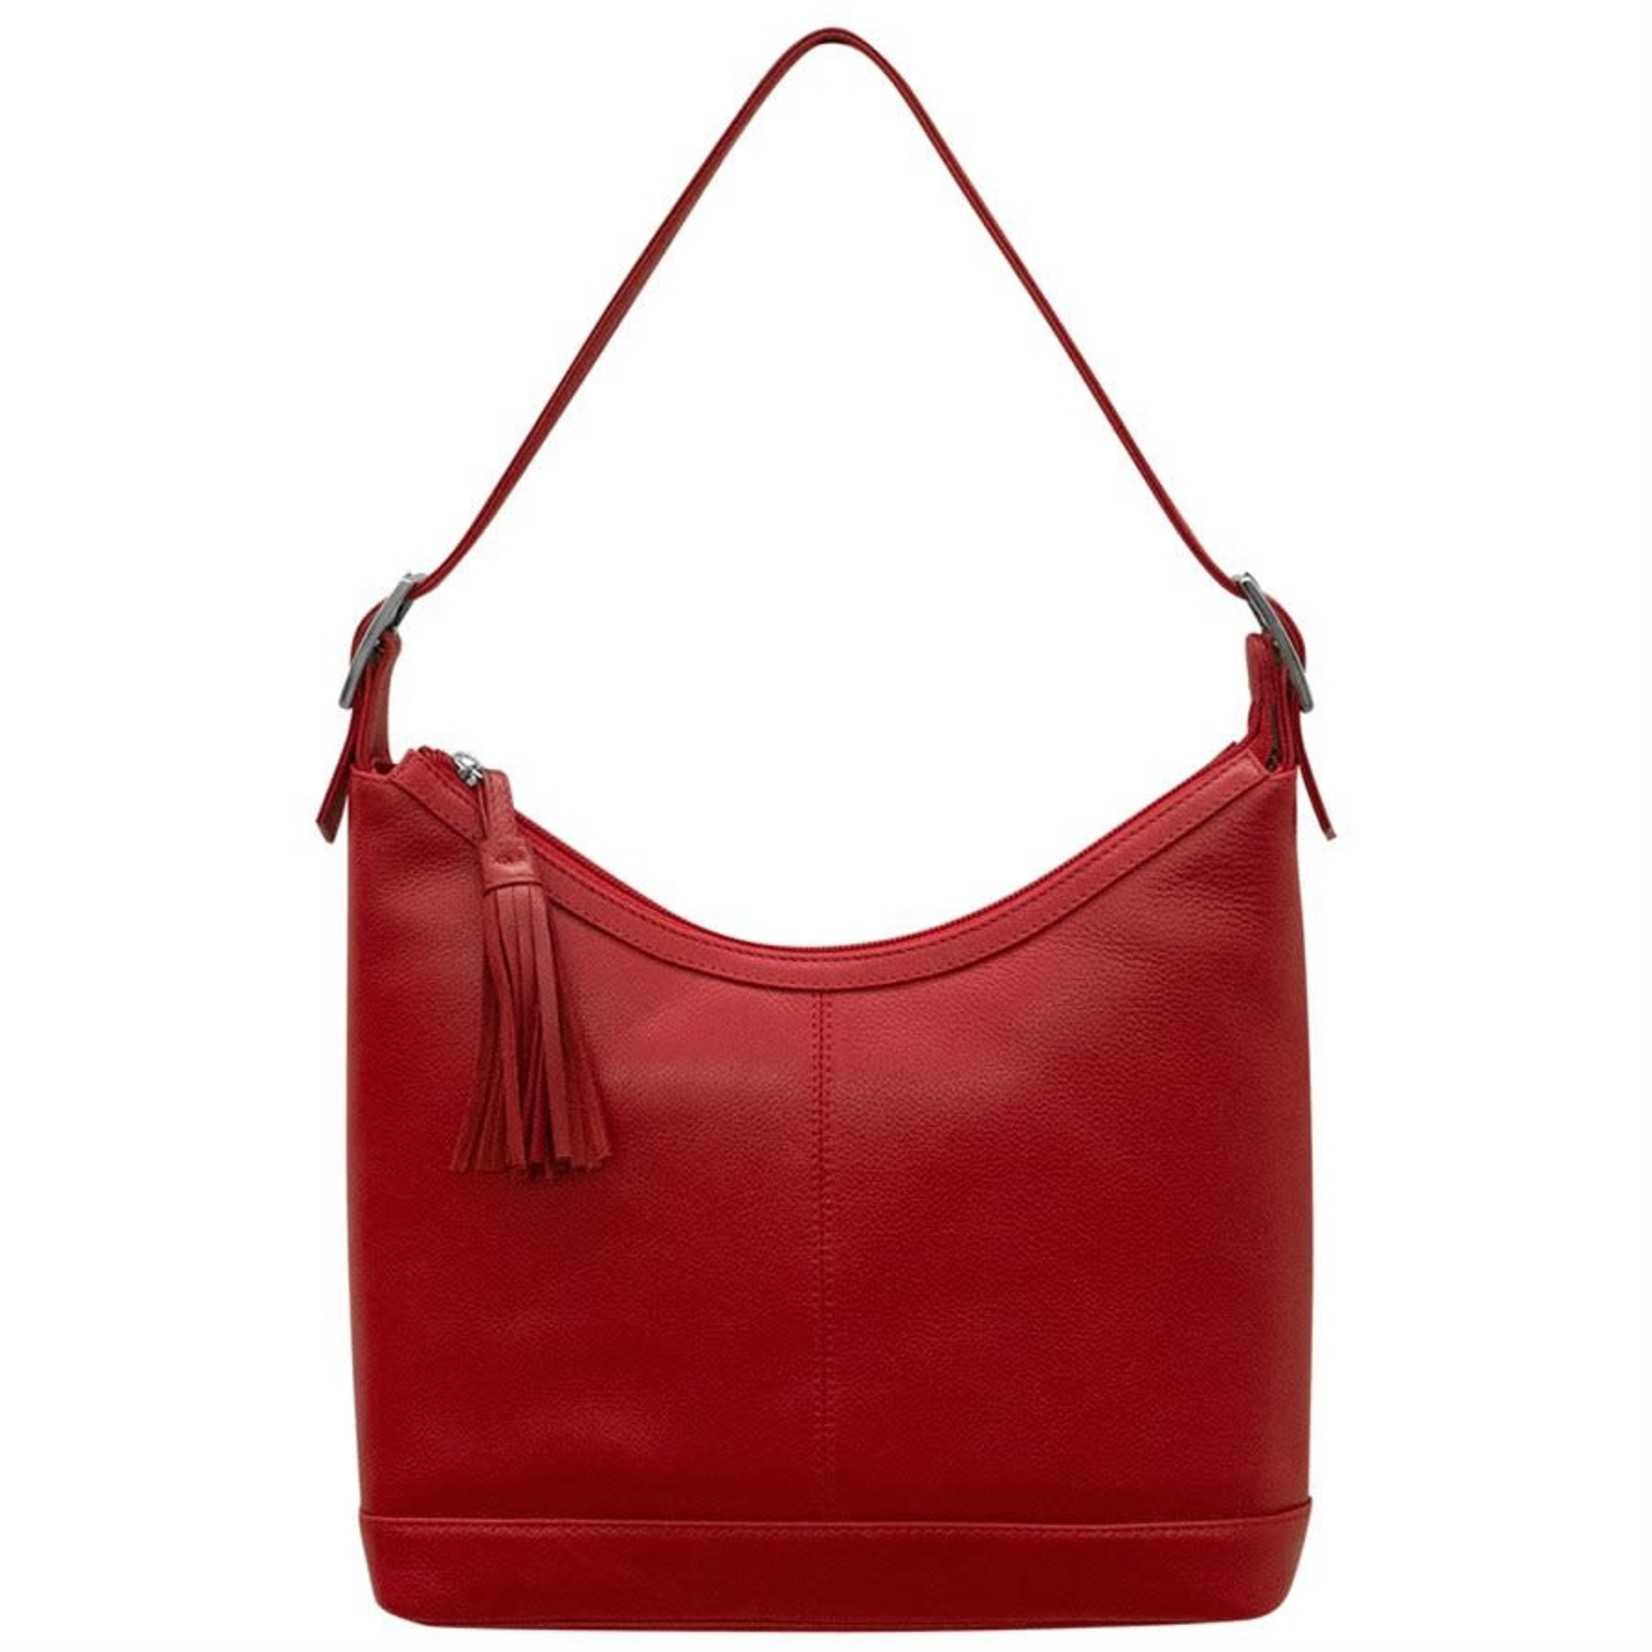 Leather Handbags and Accessories 6924 Red - Classic Leather Hobo